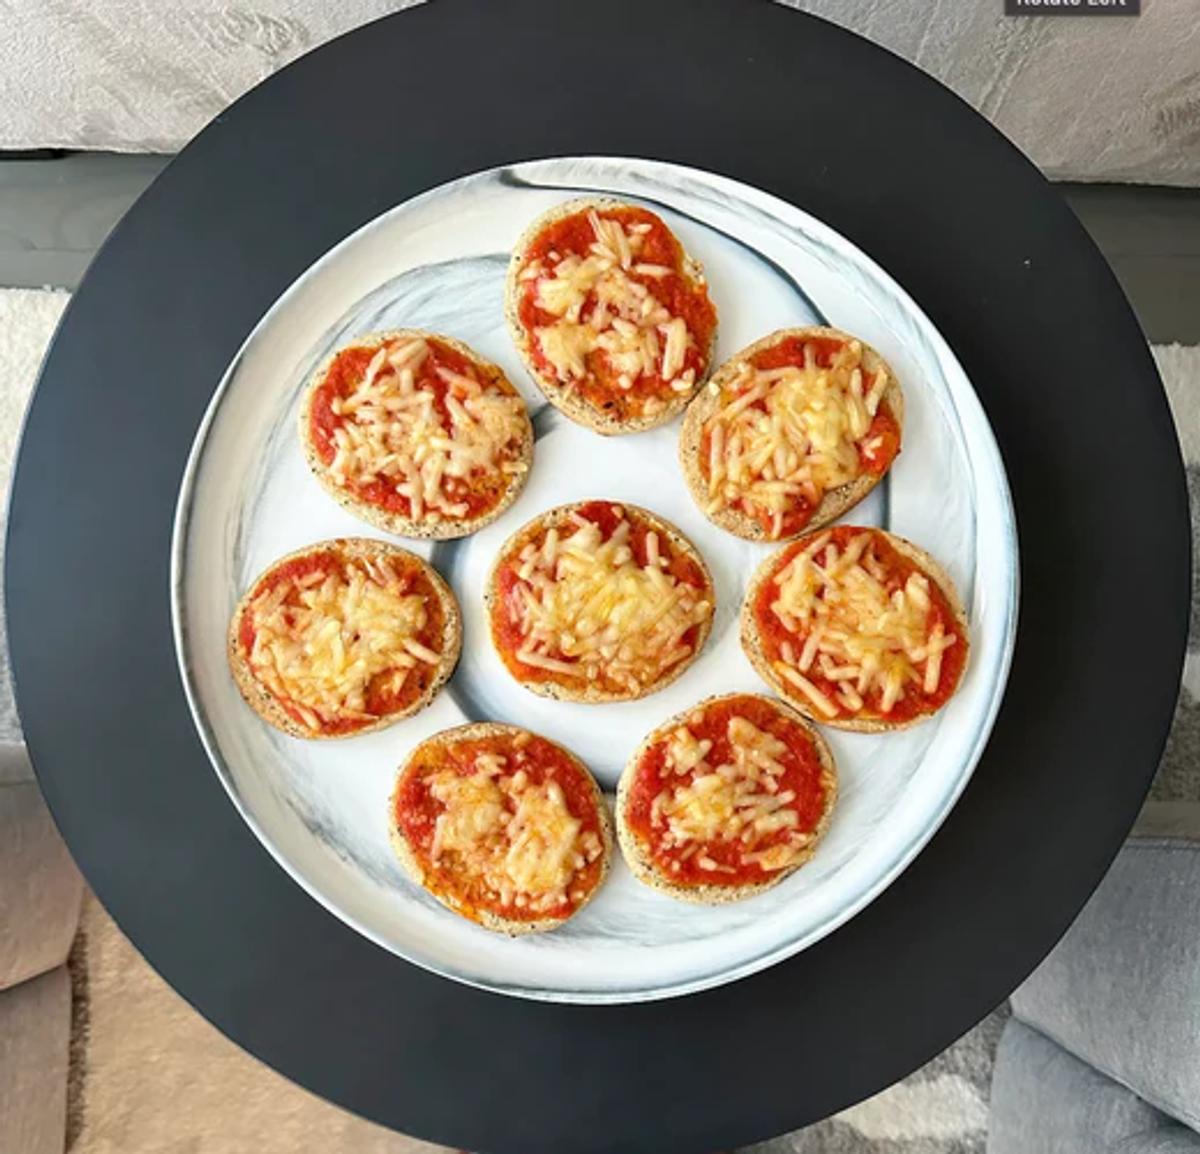 Plate of mini sized snack pizzas topped with tomato sauce and vegan mozzarella cheese